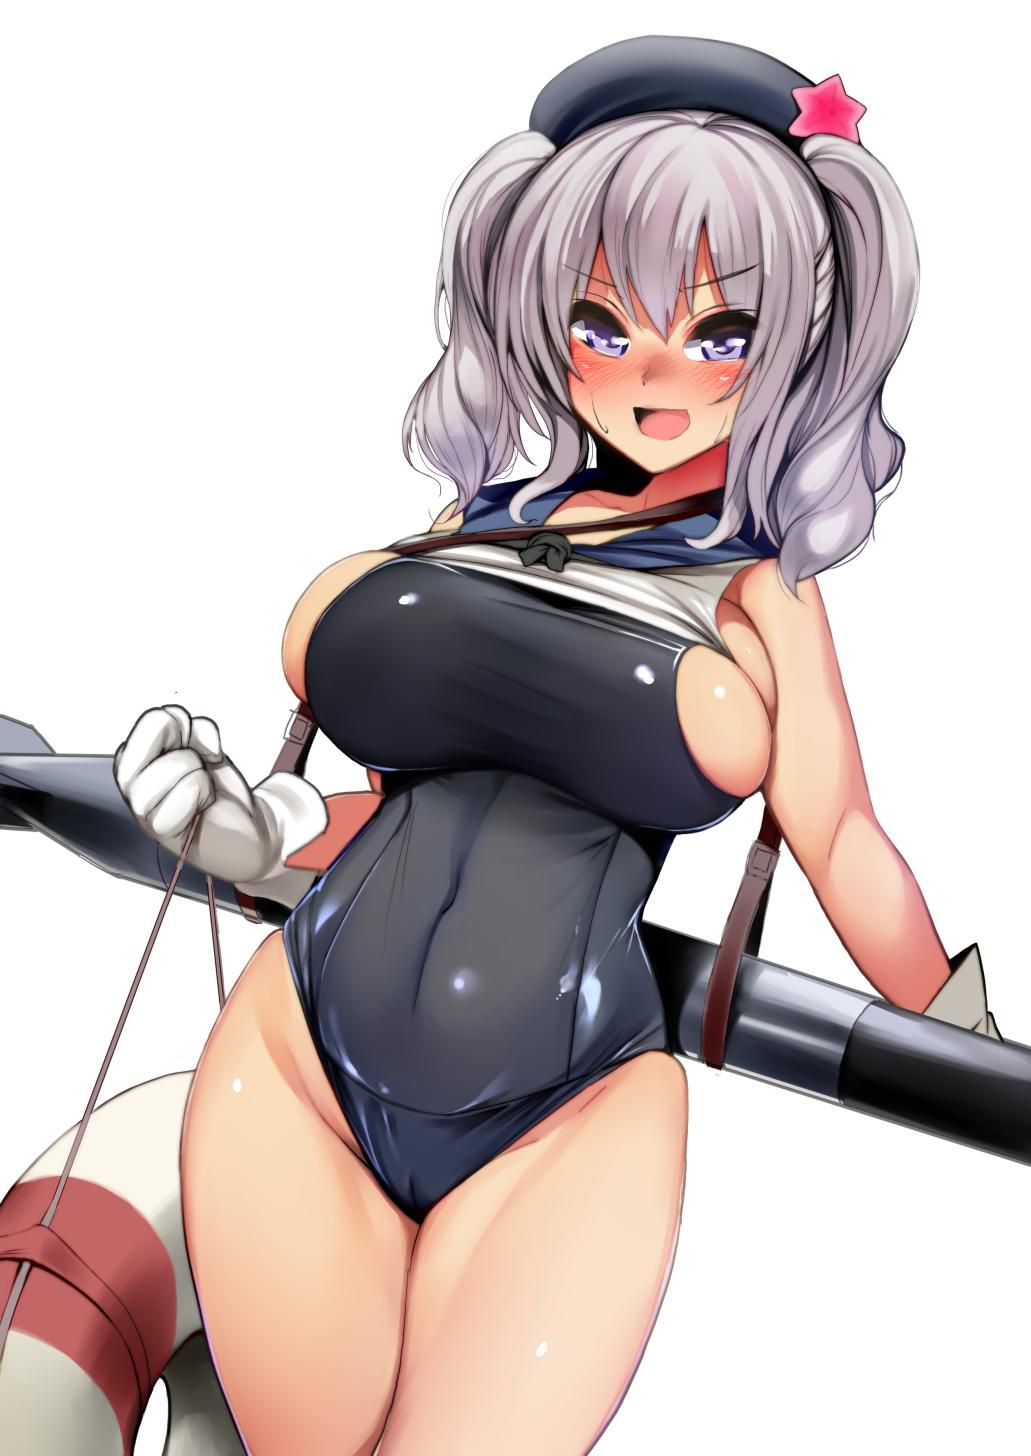 [Erotic] Ship of this new ship daughter of Kashima Image surge www wwwwww part1 8